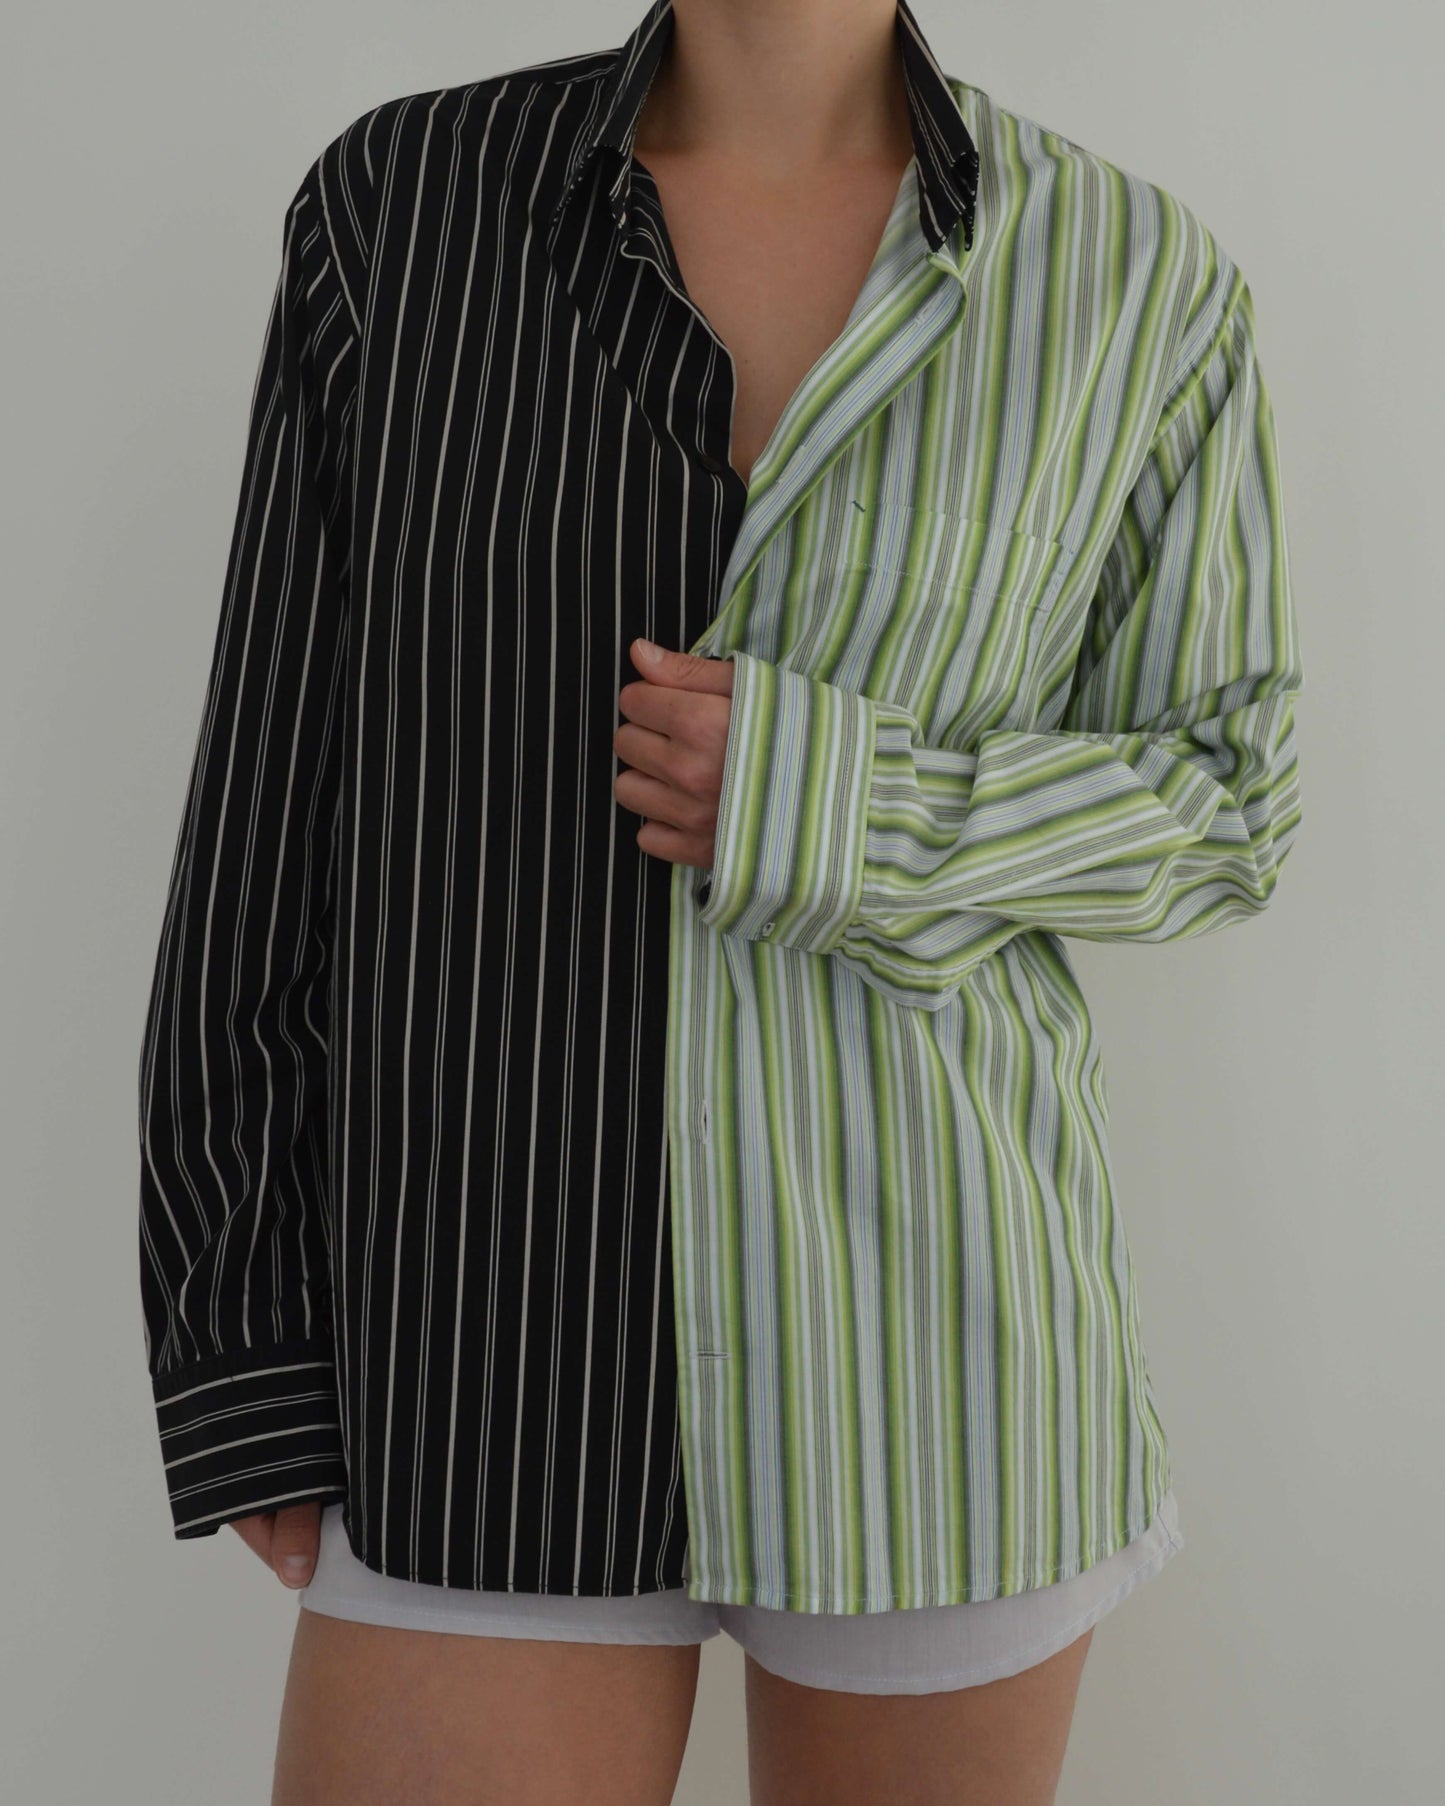 DUO Shirt - Perfect Contrast (S/L)